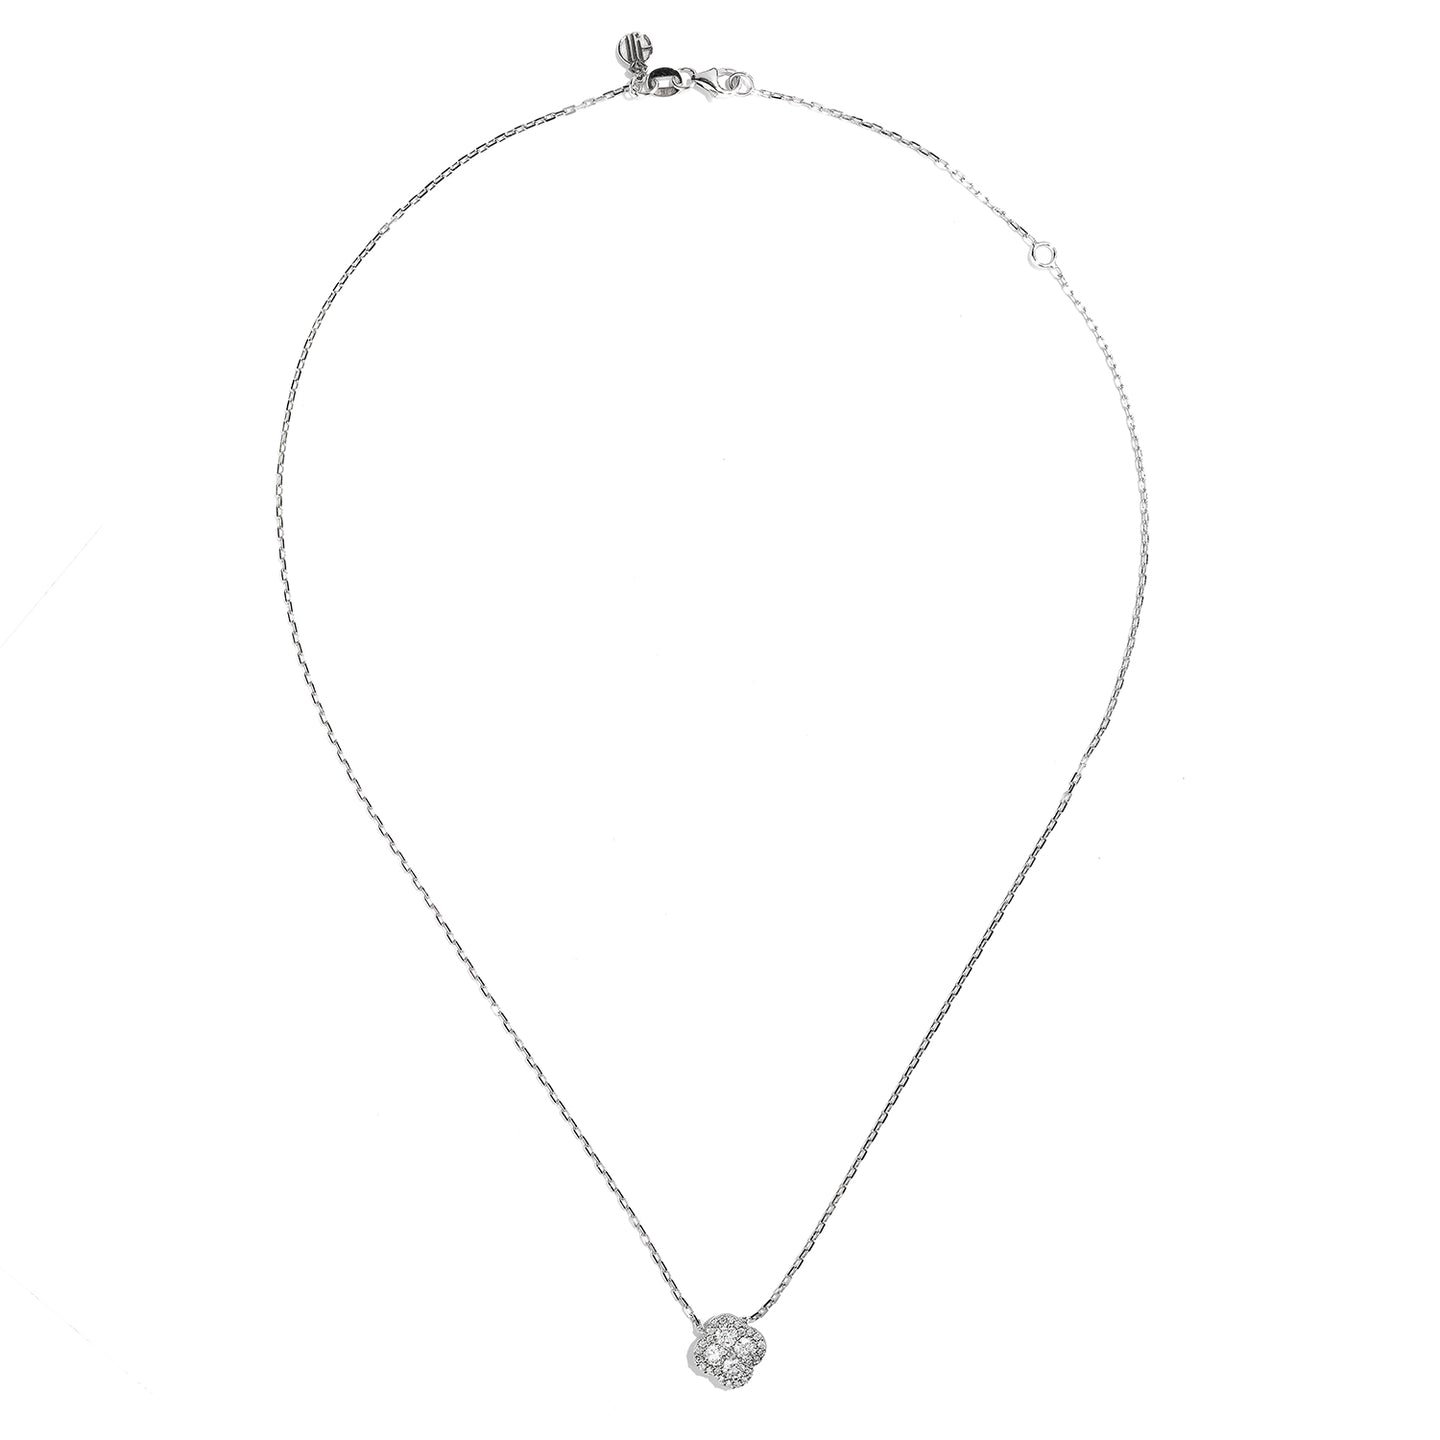 Sabel Collection 18K White Gold Round Diamond Clover Necklace with Milgrain Accents